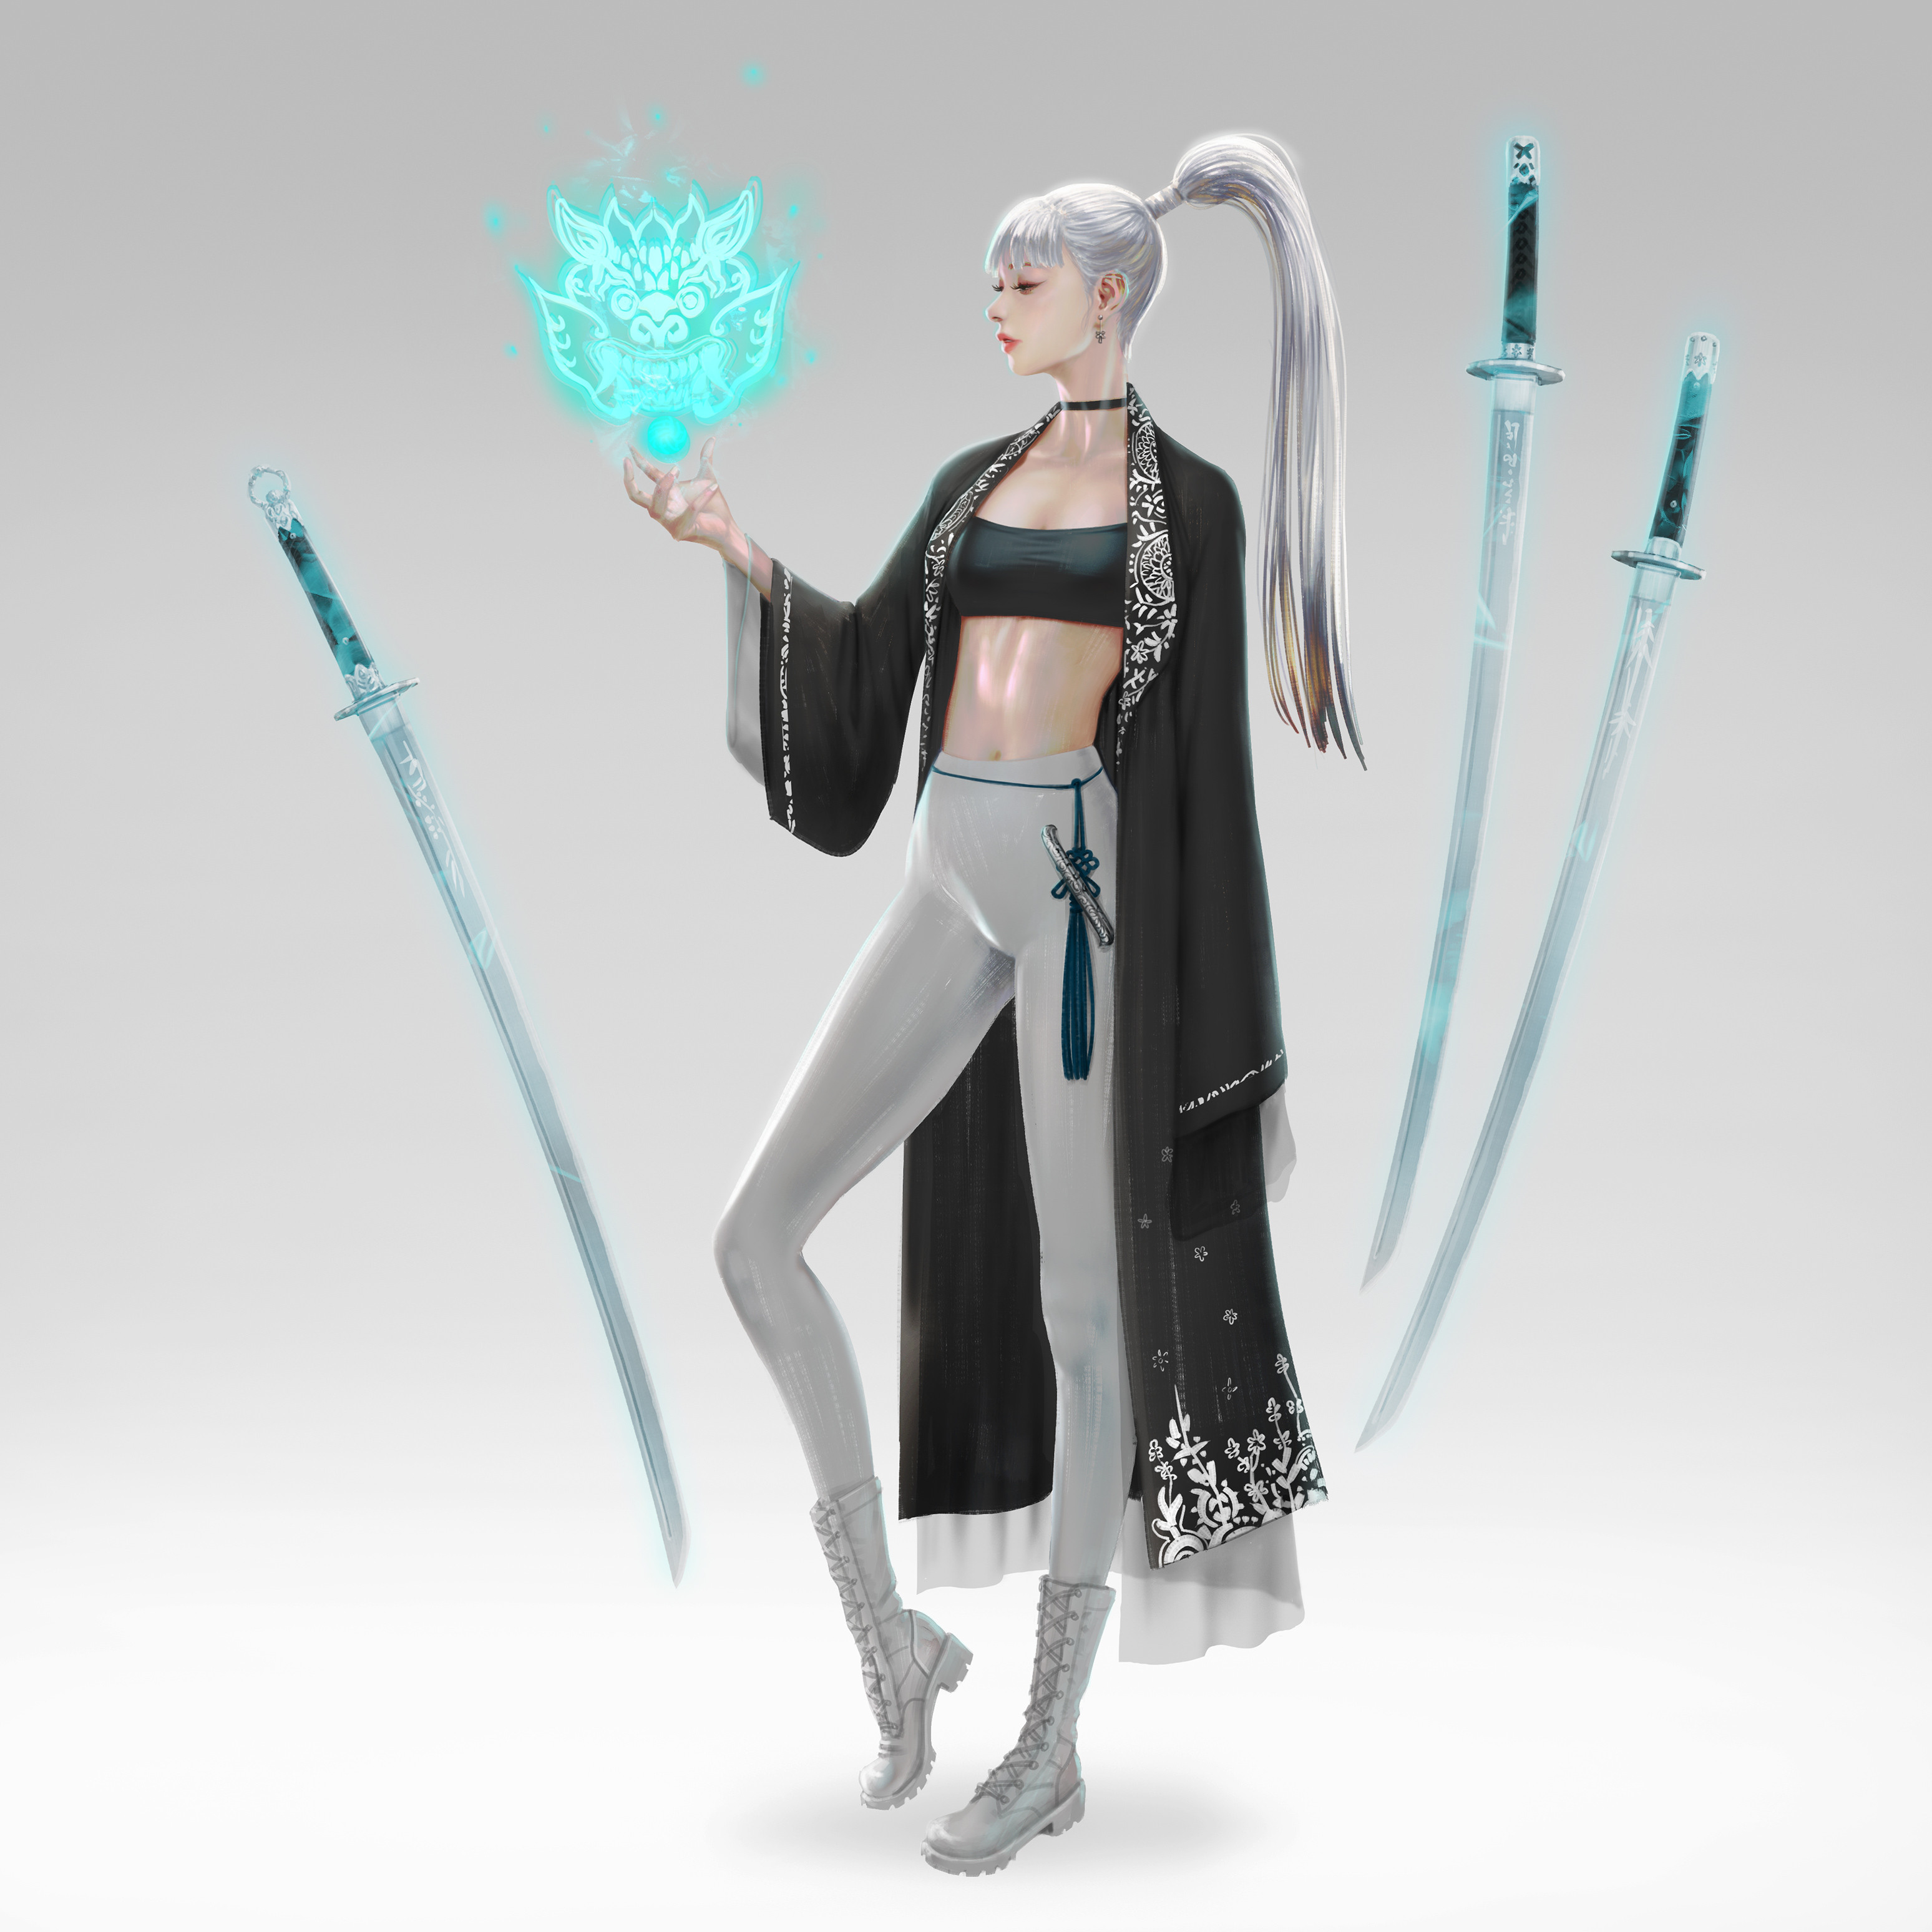 LightBox Drawing Women Silver Hair Robes Ponytail Weapon Katana Magic Spell Simple Background 3096x3096